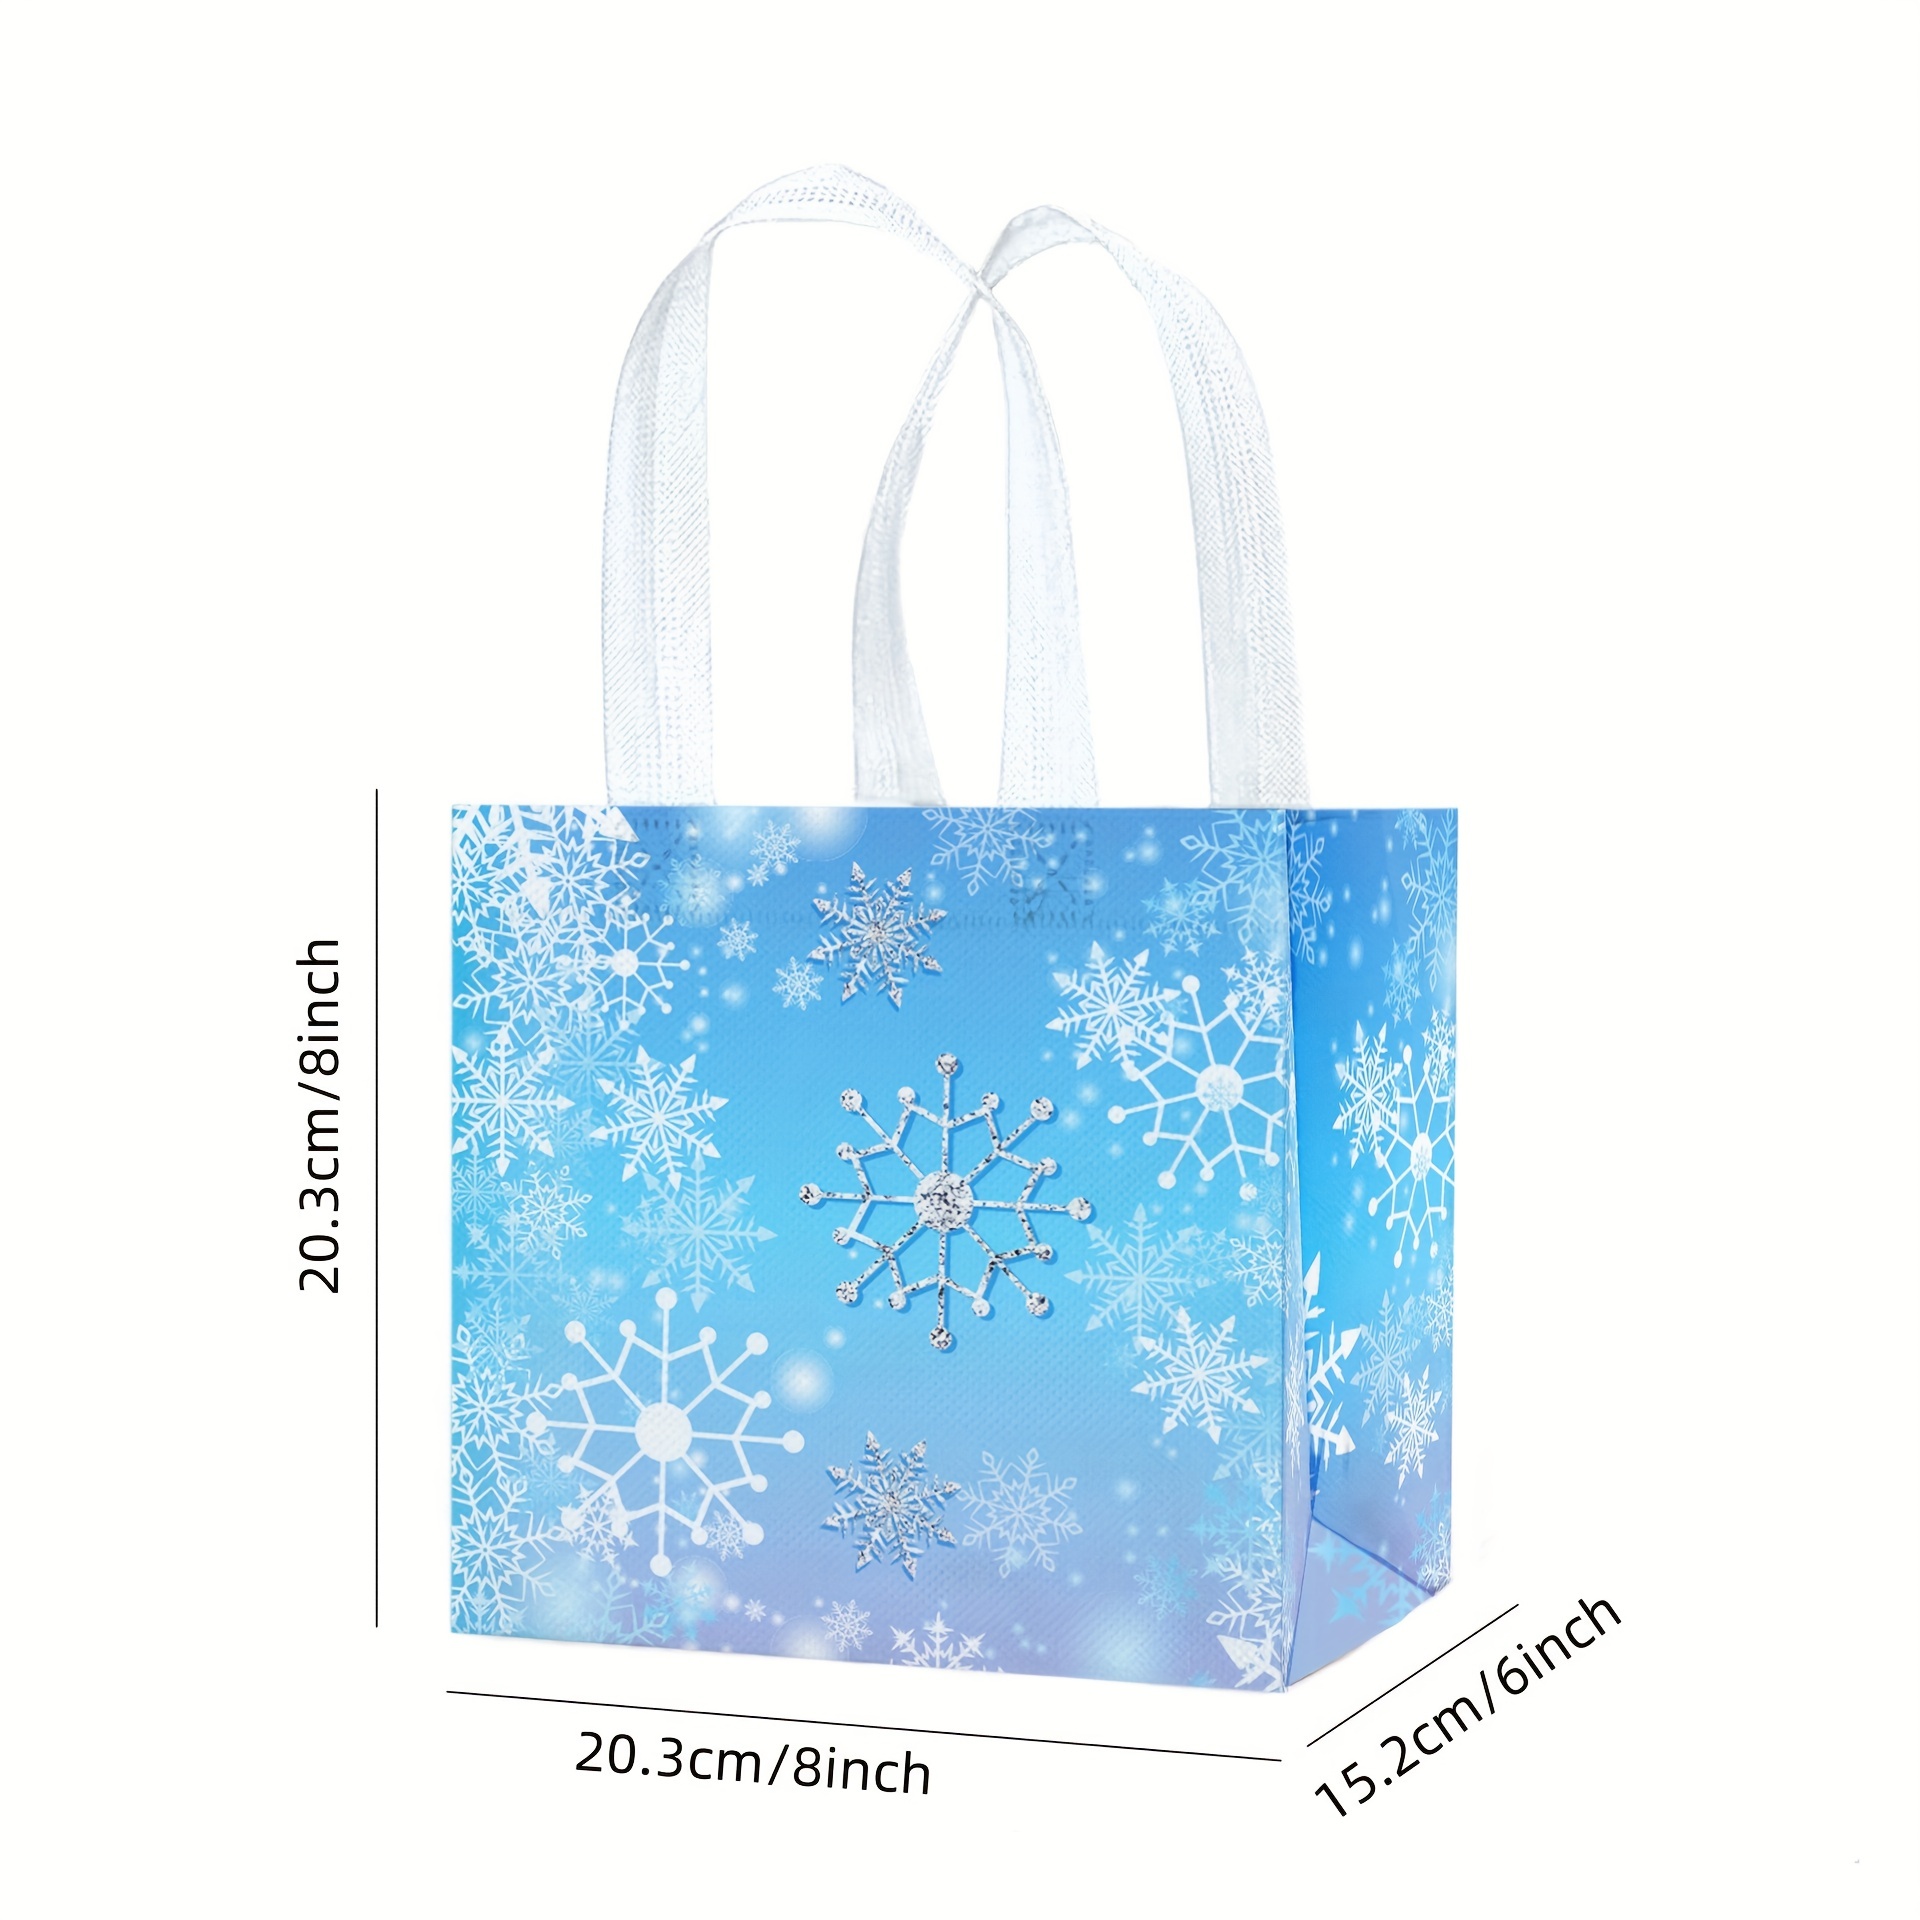 Set of 4 Ounces of Artificial Snow Flakes Bag Blue Printed Polybag